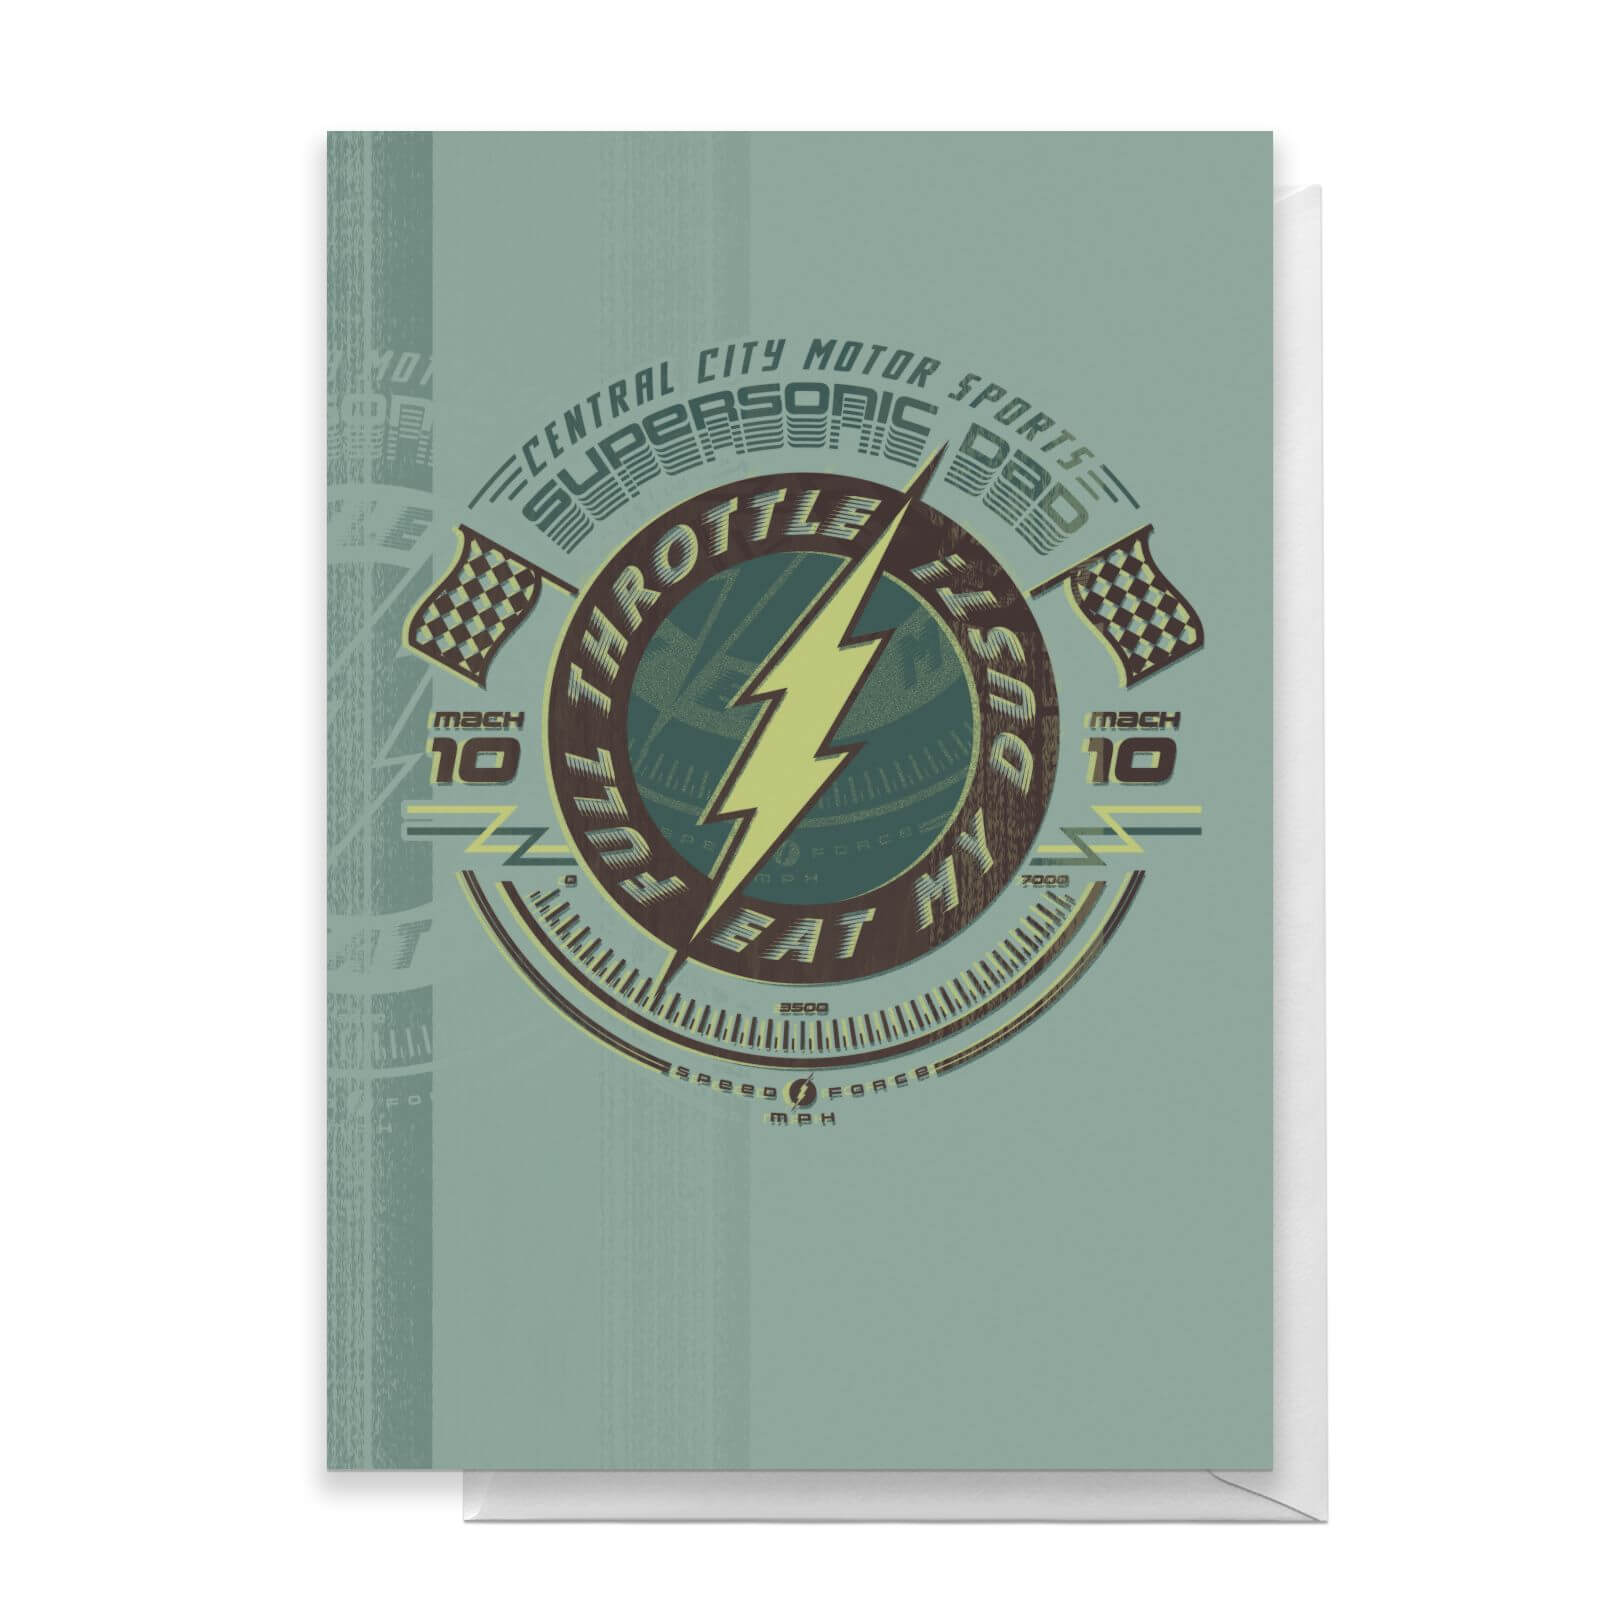 The Flash Father's Day Greetings Card - Standard Card